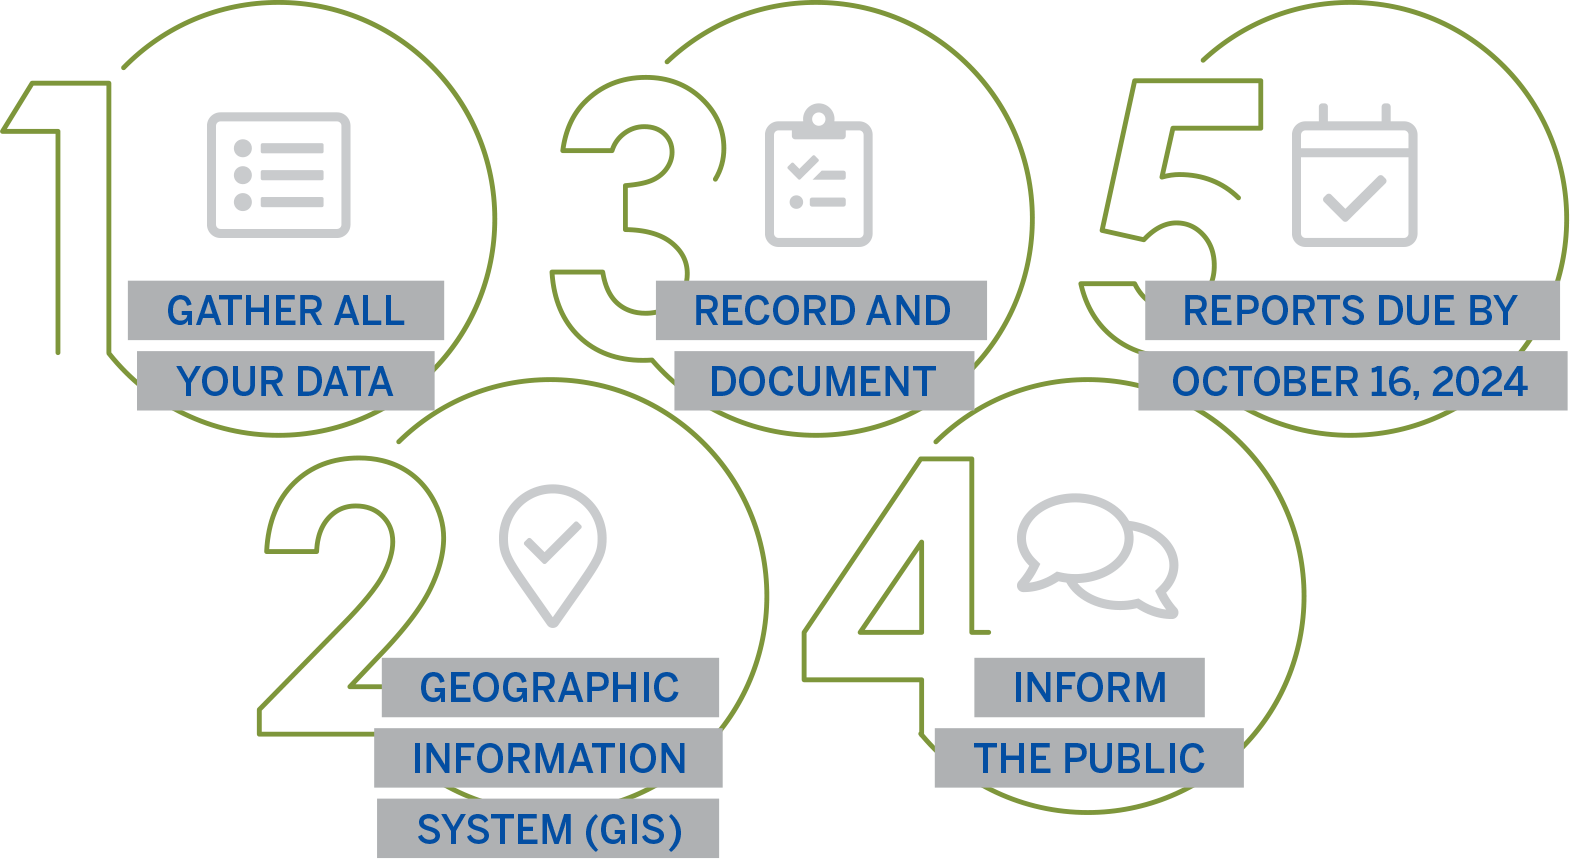 Infographic showing the 5 steps: Gather all your data, GIS, Record and Document, Inform the Public, Reports due October 16, 2024